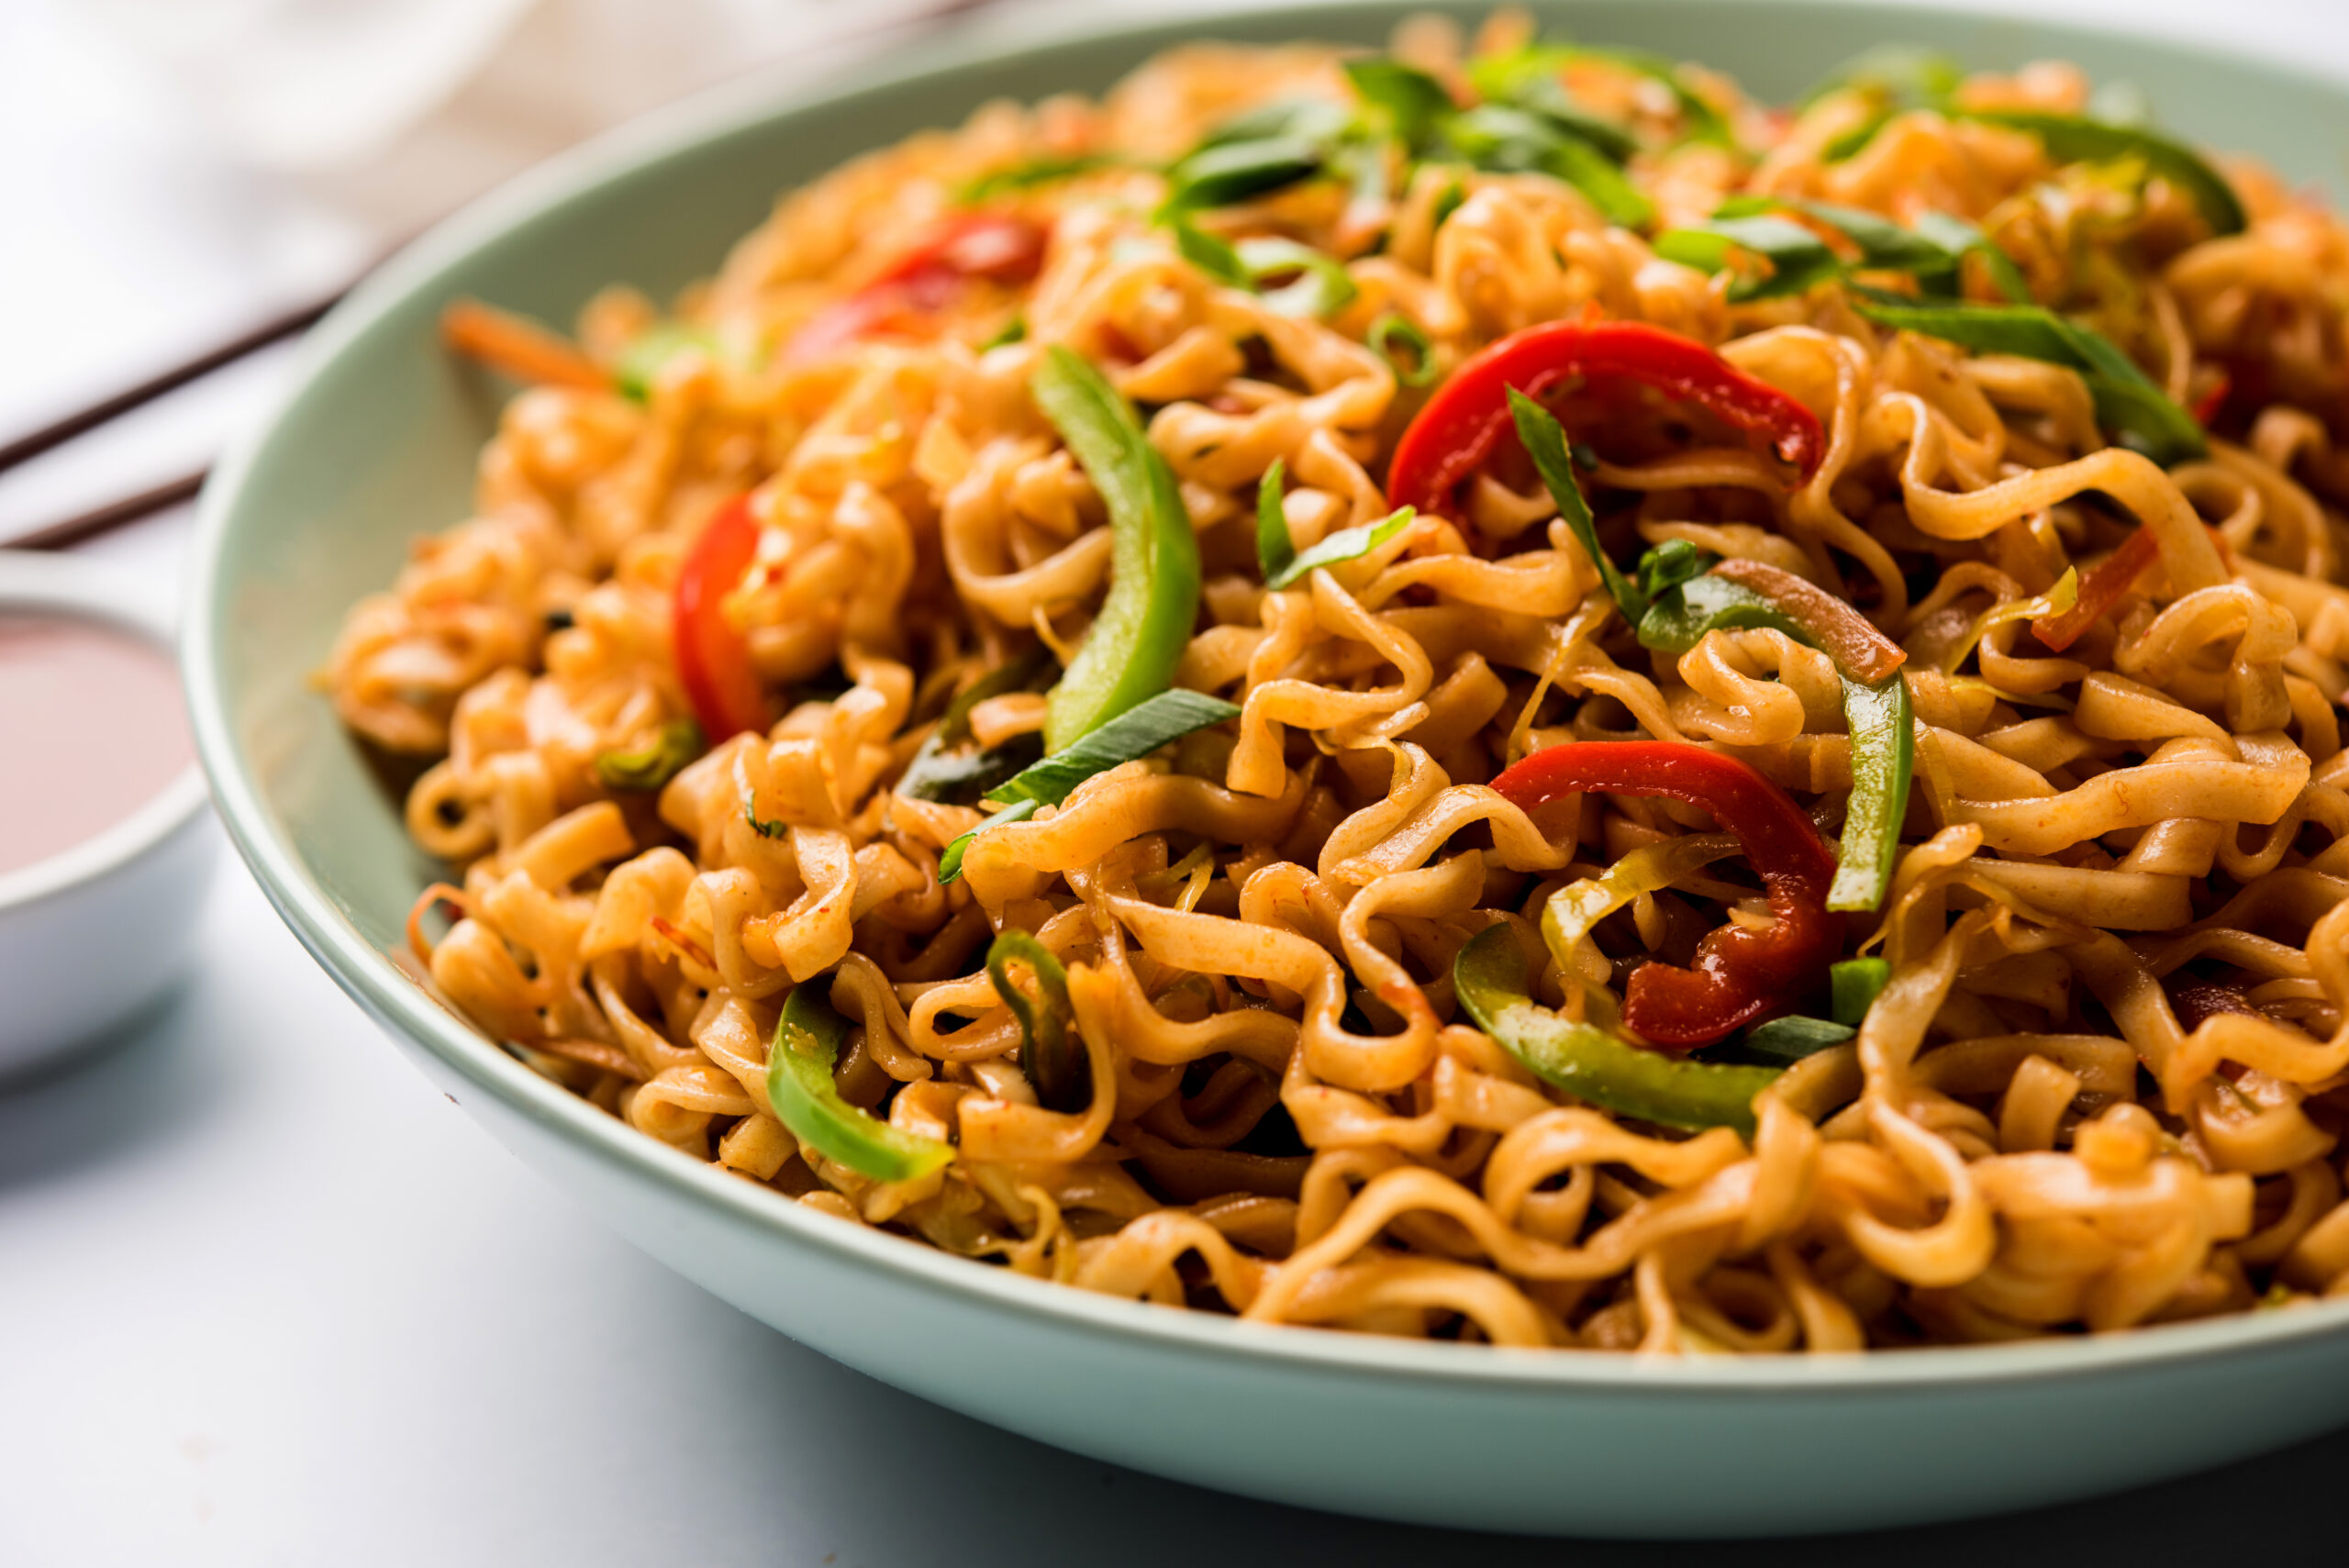 Healthy Veggie Noodle Recipe to Try This Summer